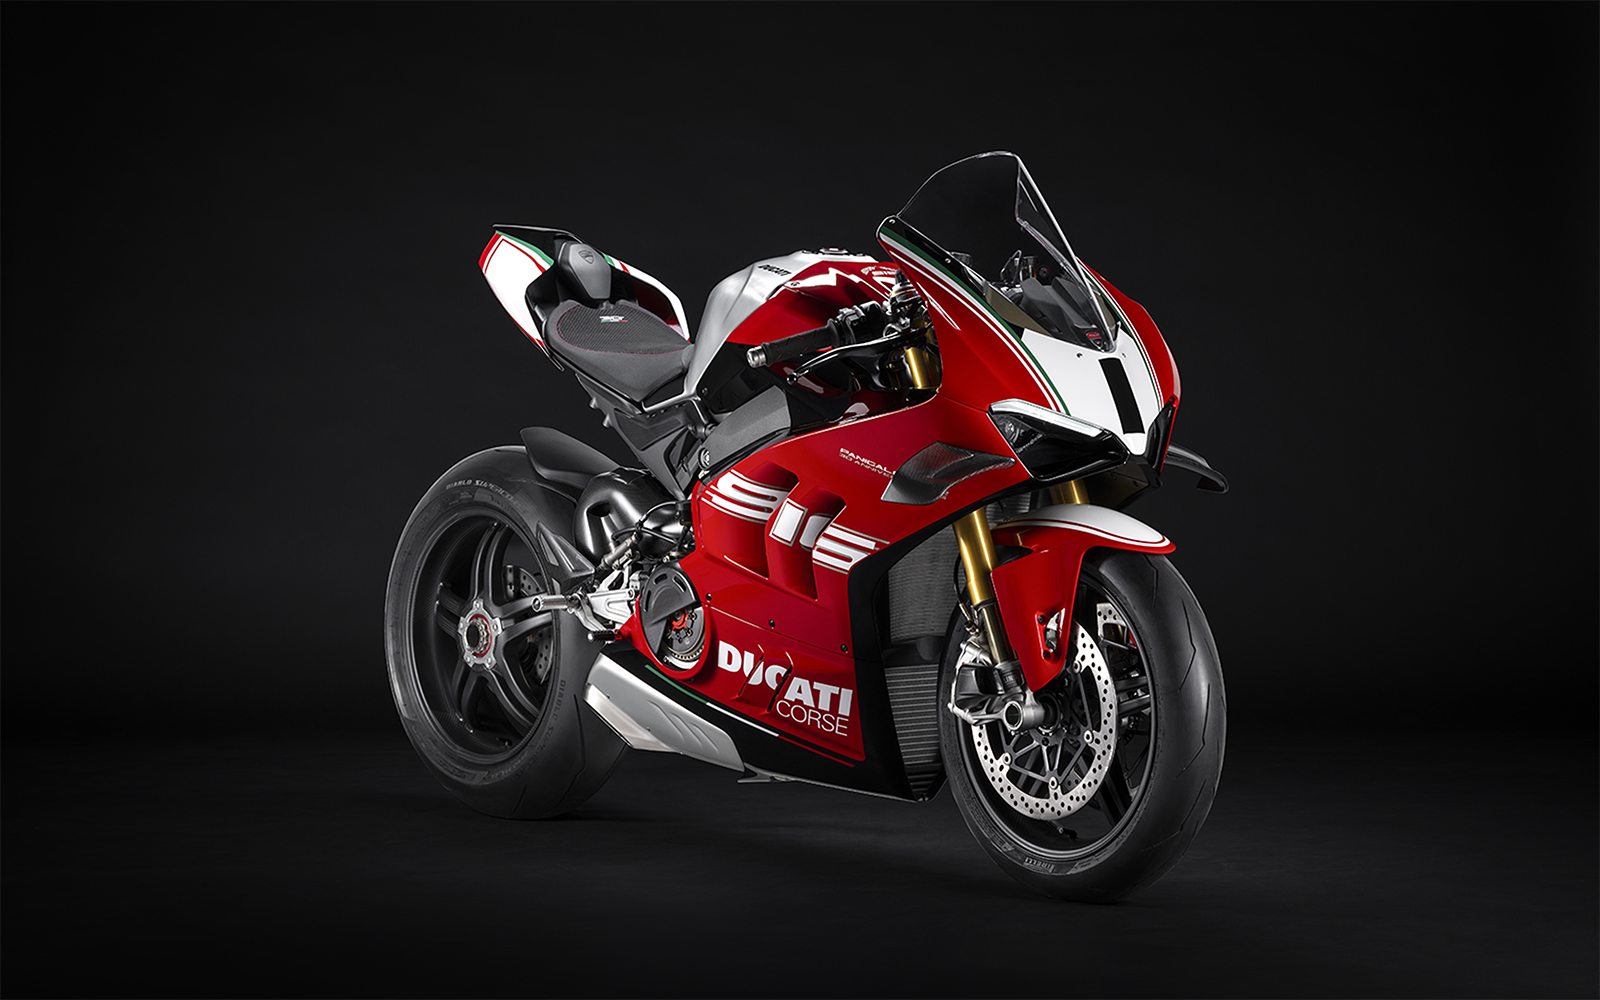 Panigale V4 SP2 30° Anniversario 916 - The power of legacy